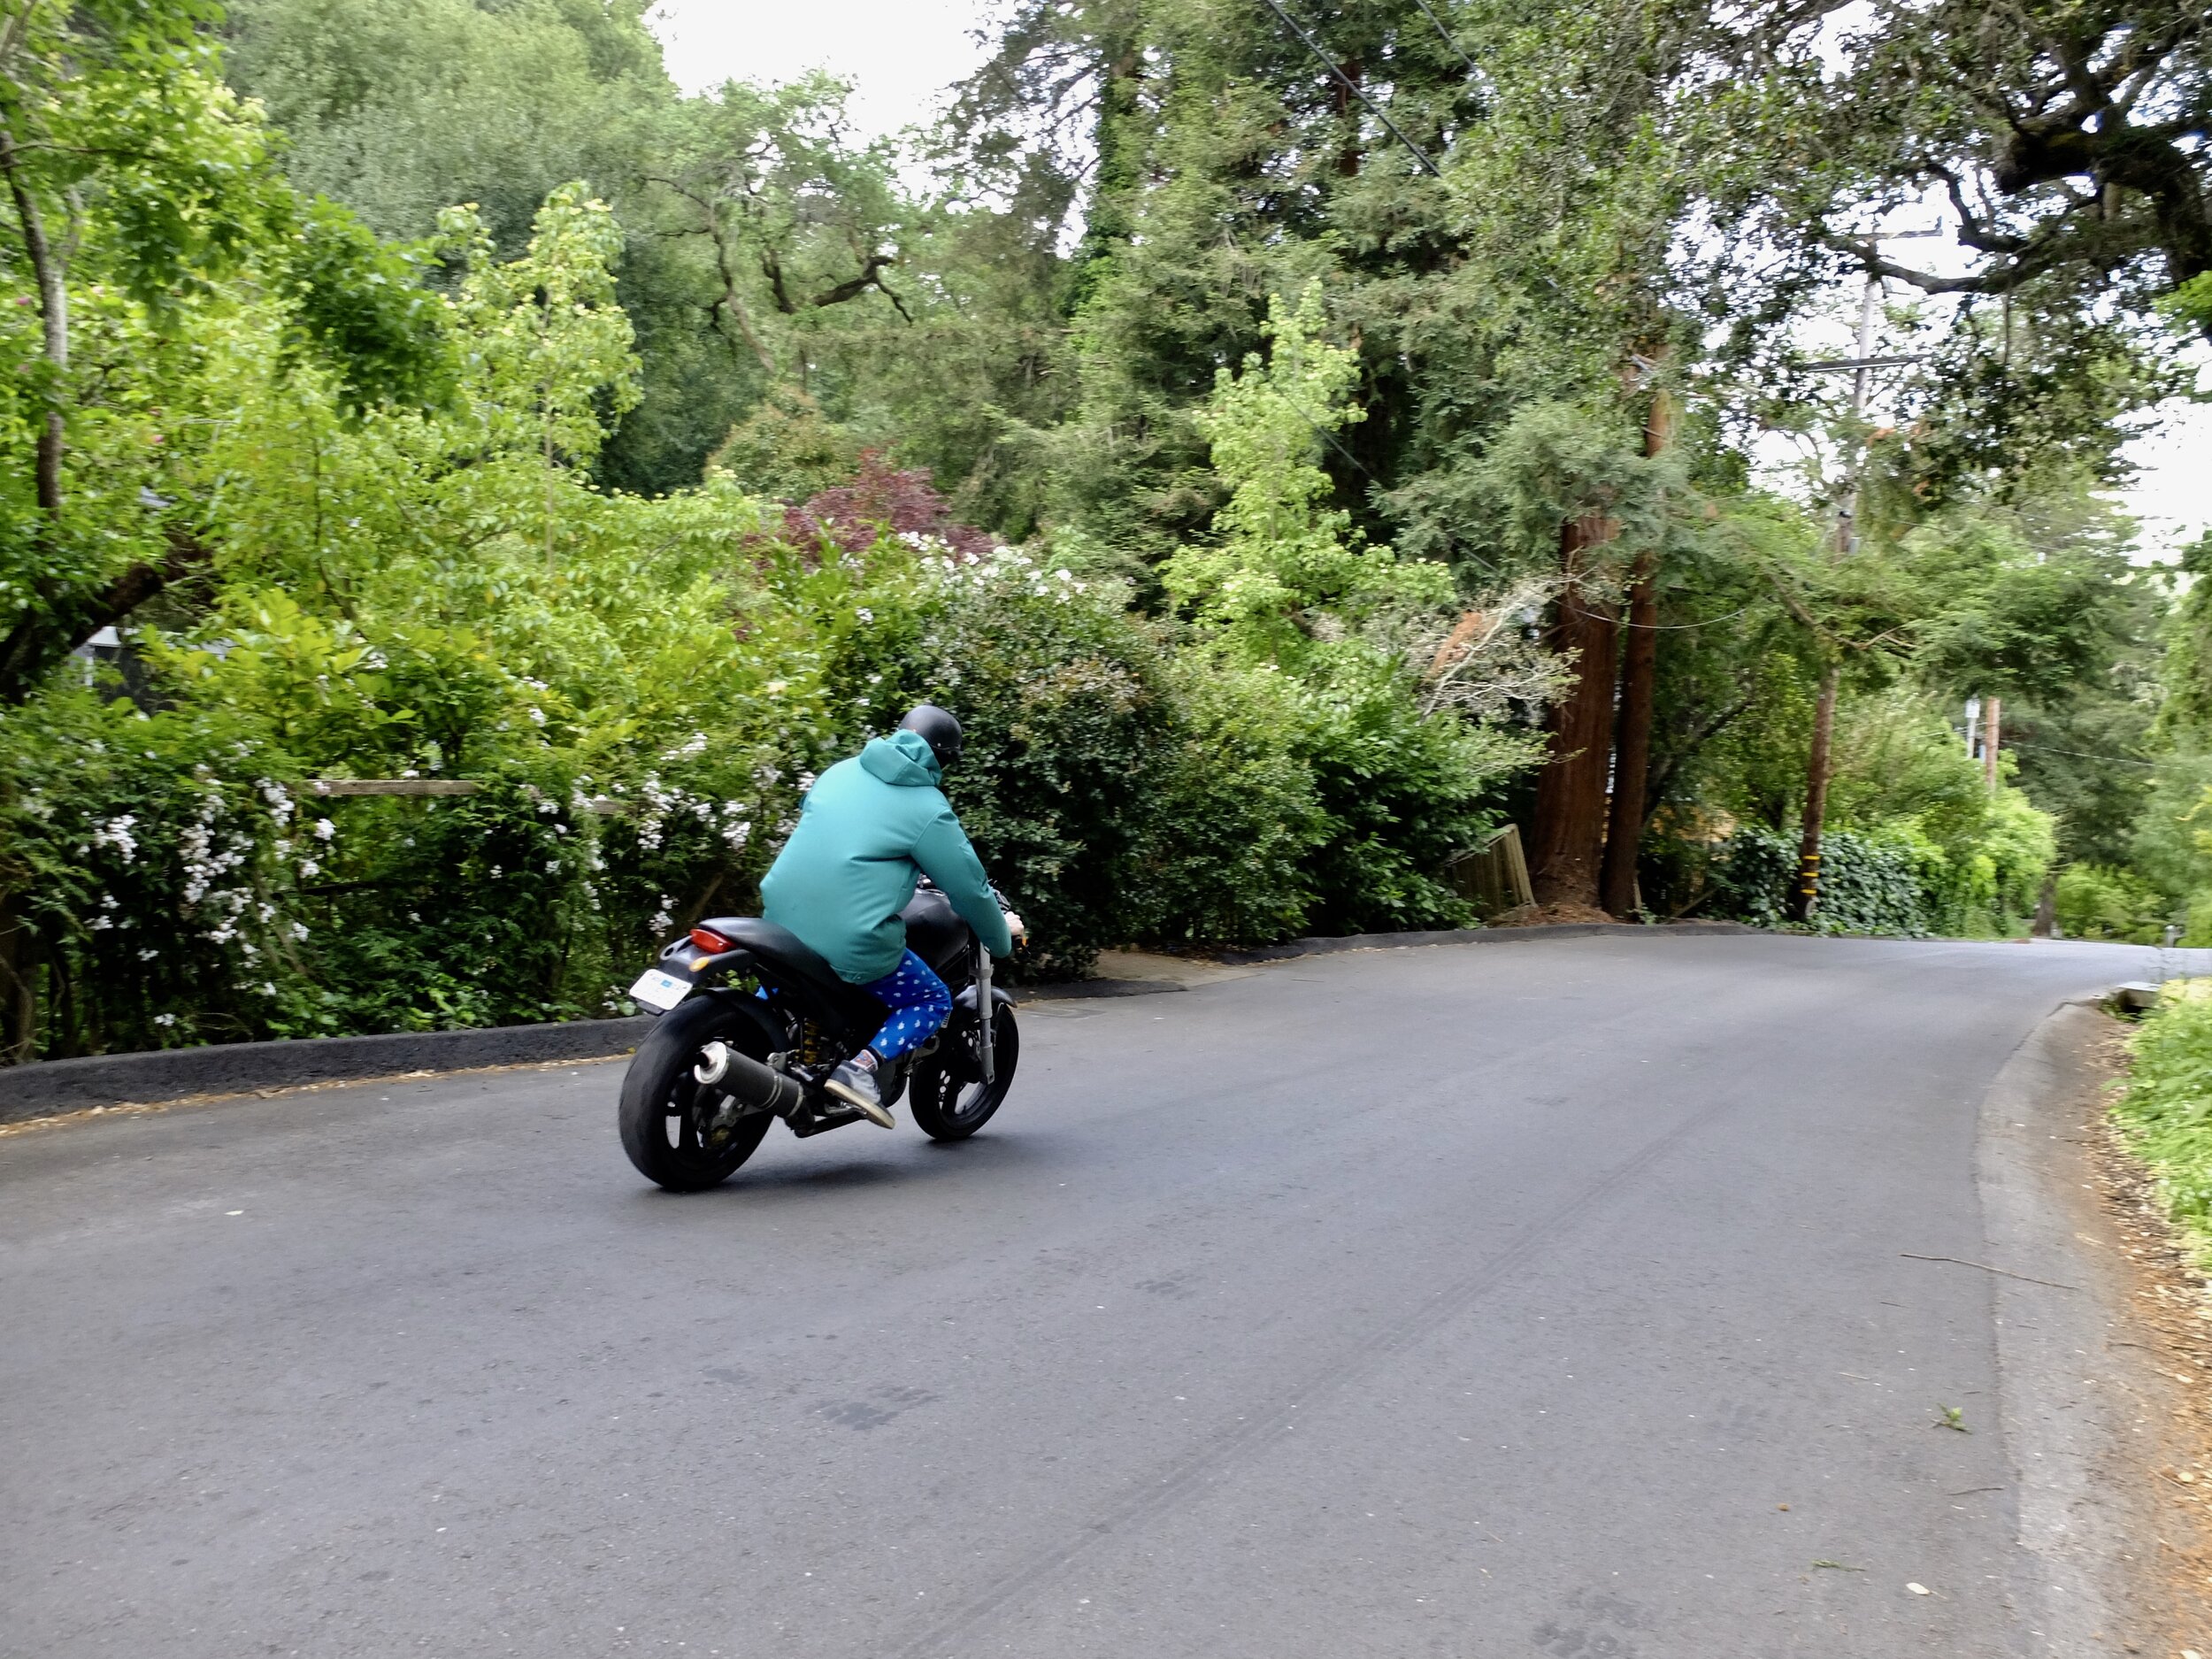 Zooming through the backroads of Ross.  I've done this on the VESPA, albeit a lot slower than this fella was going.